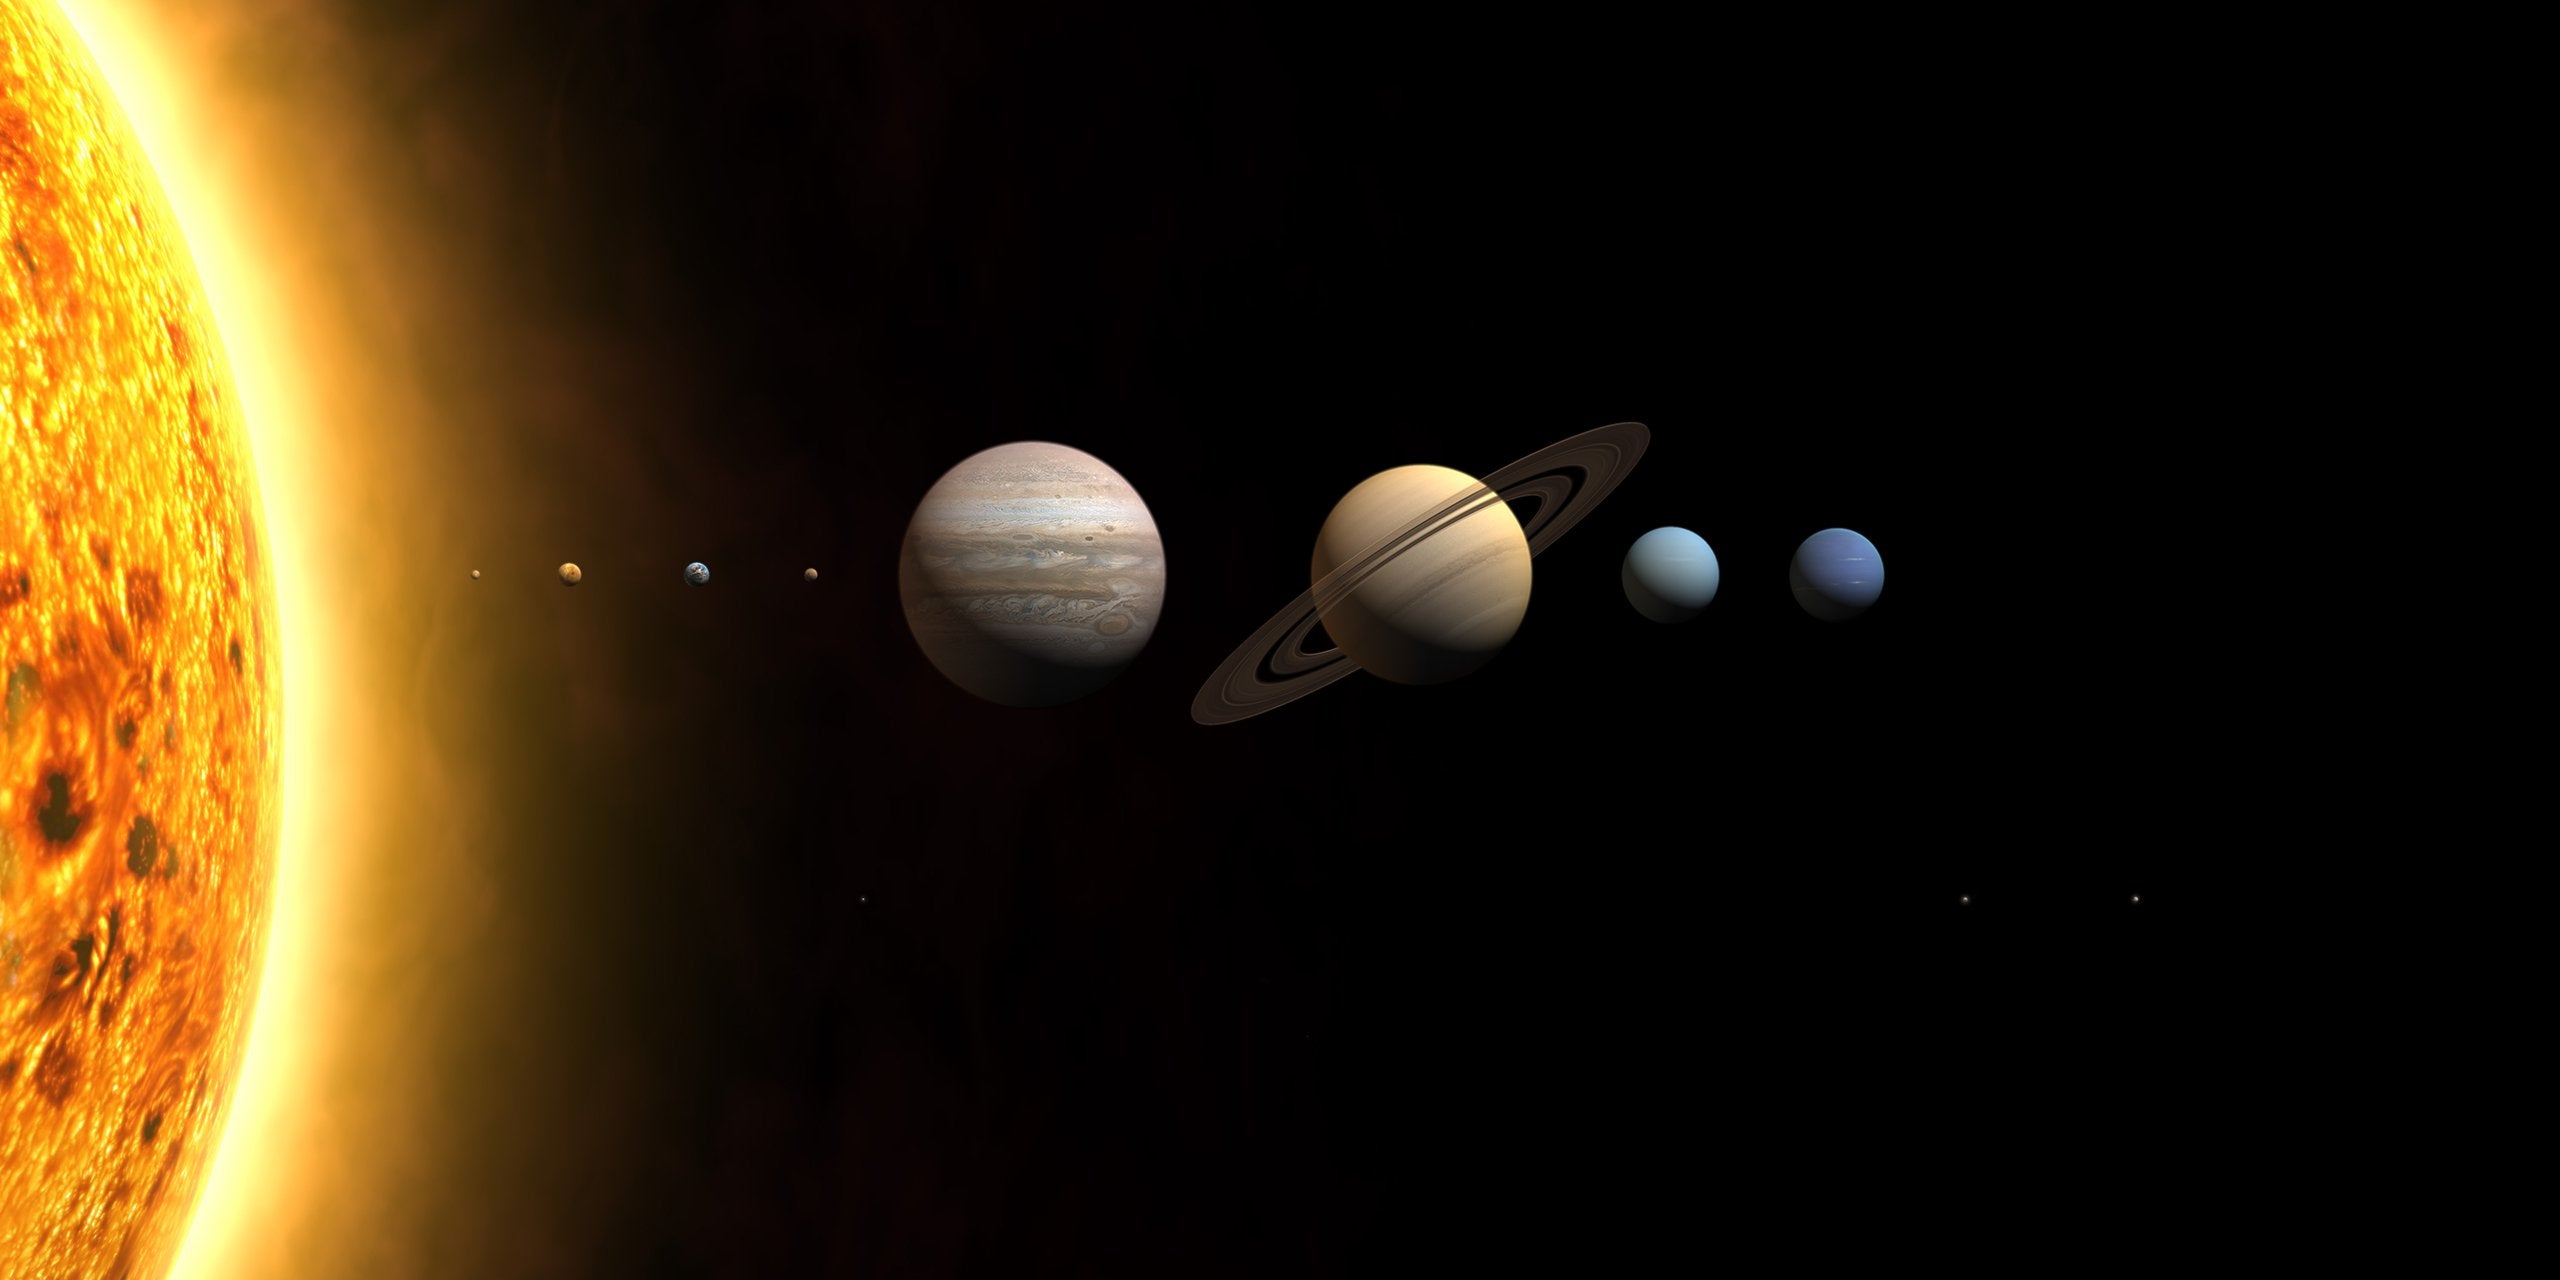 planets around the moon